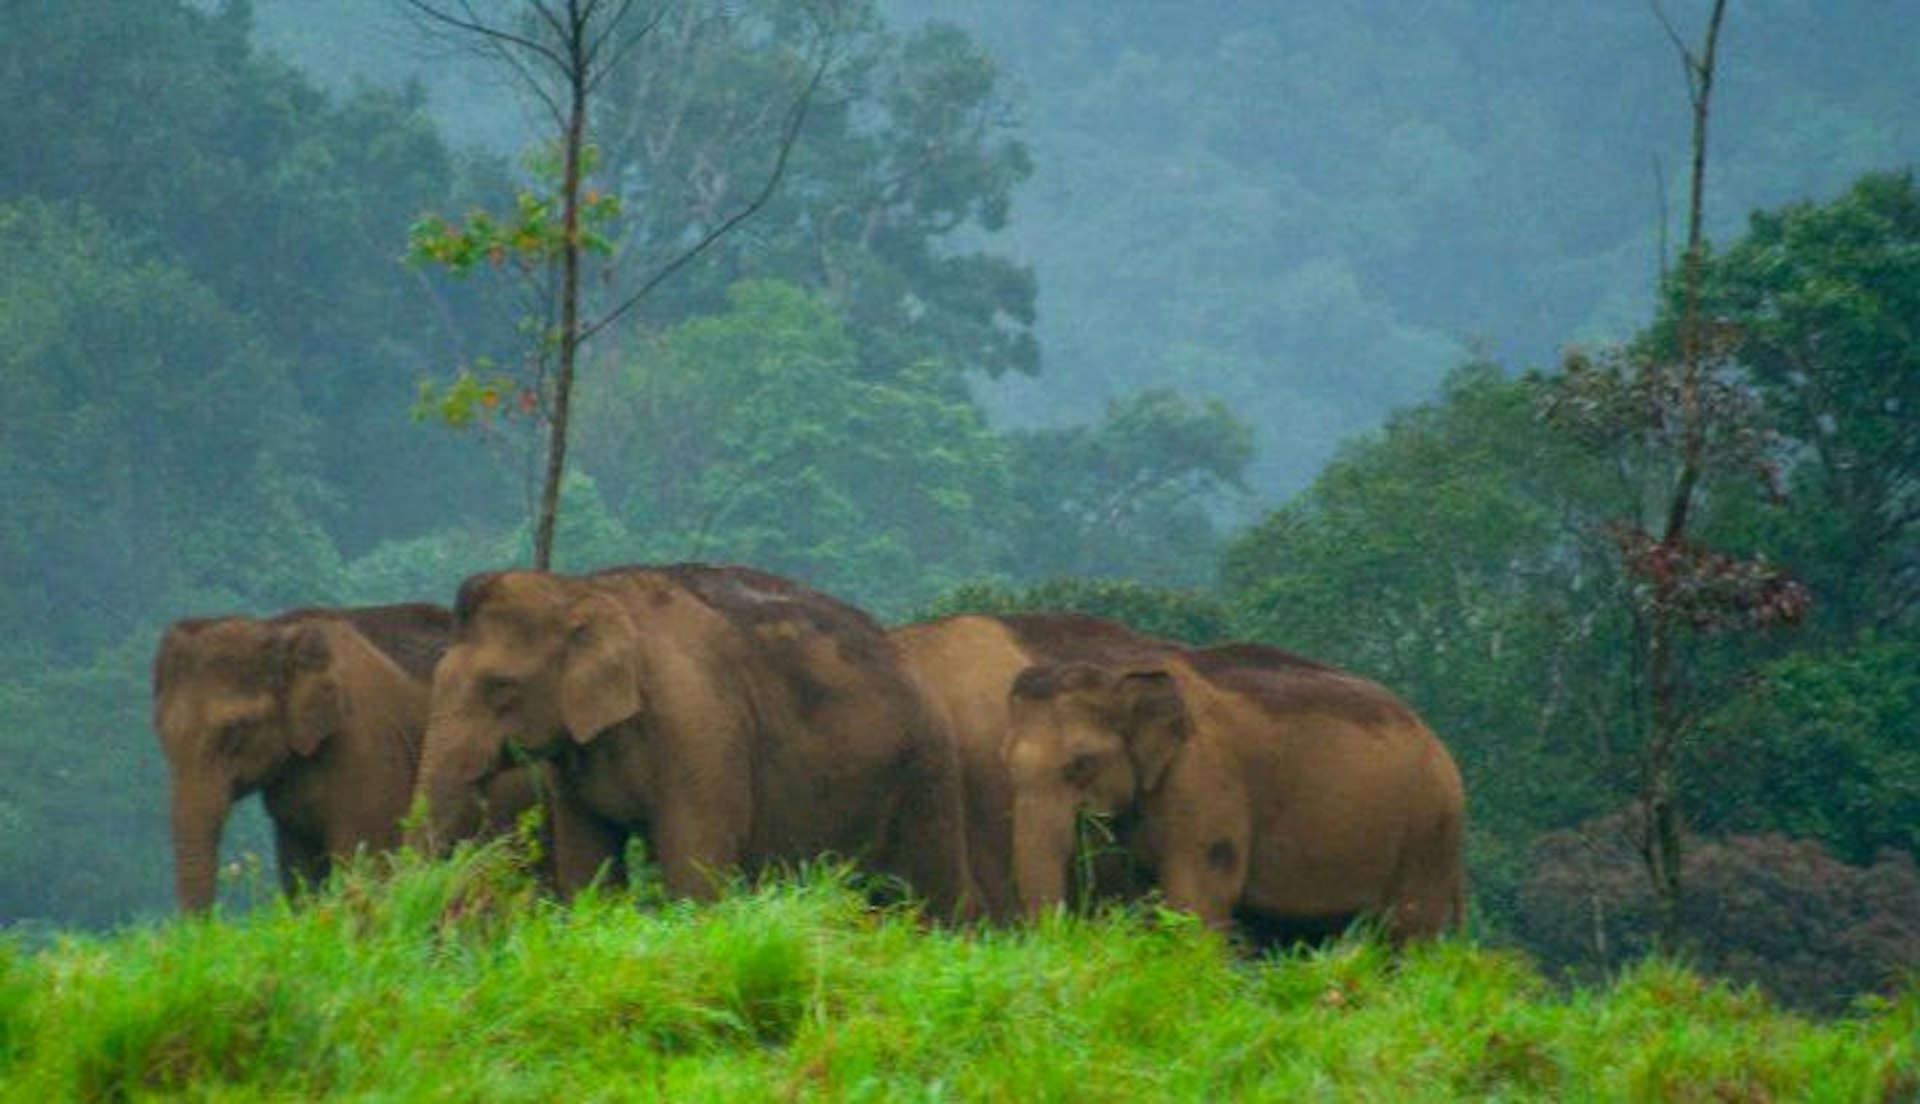 Wild elephants in India surrounded by green jungle